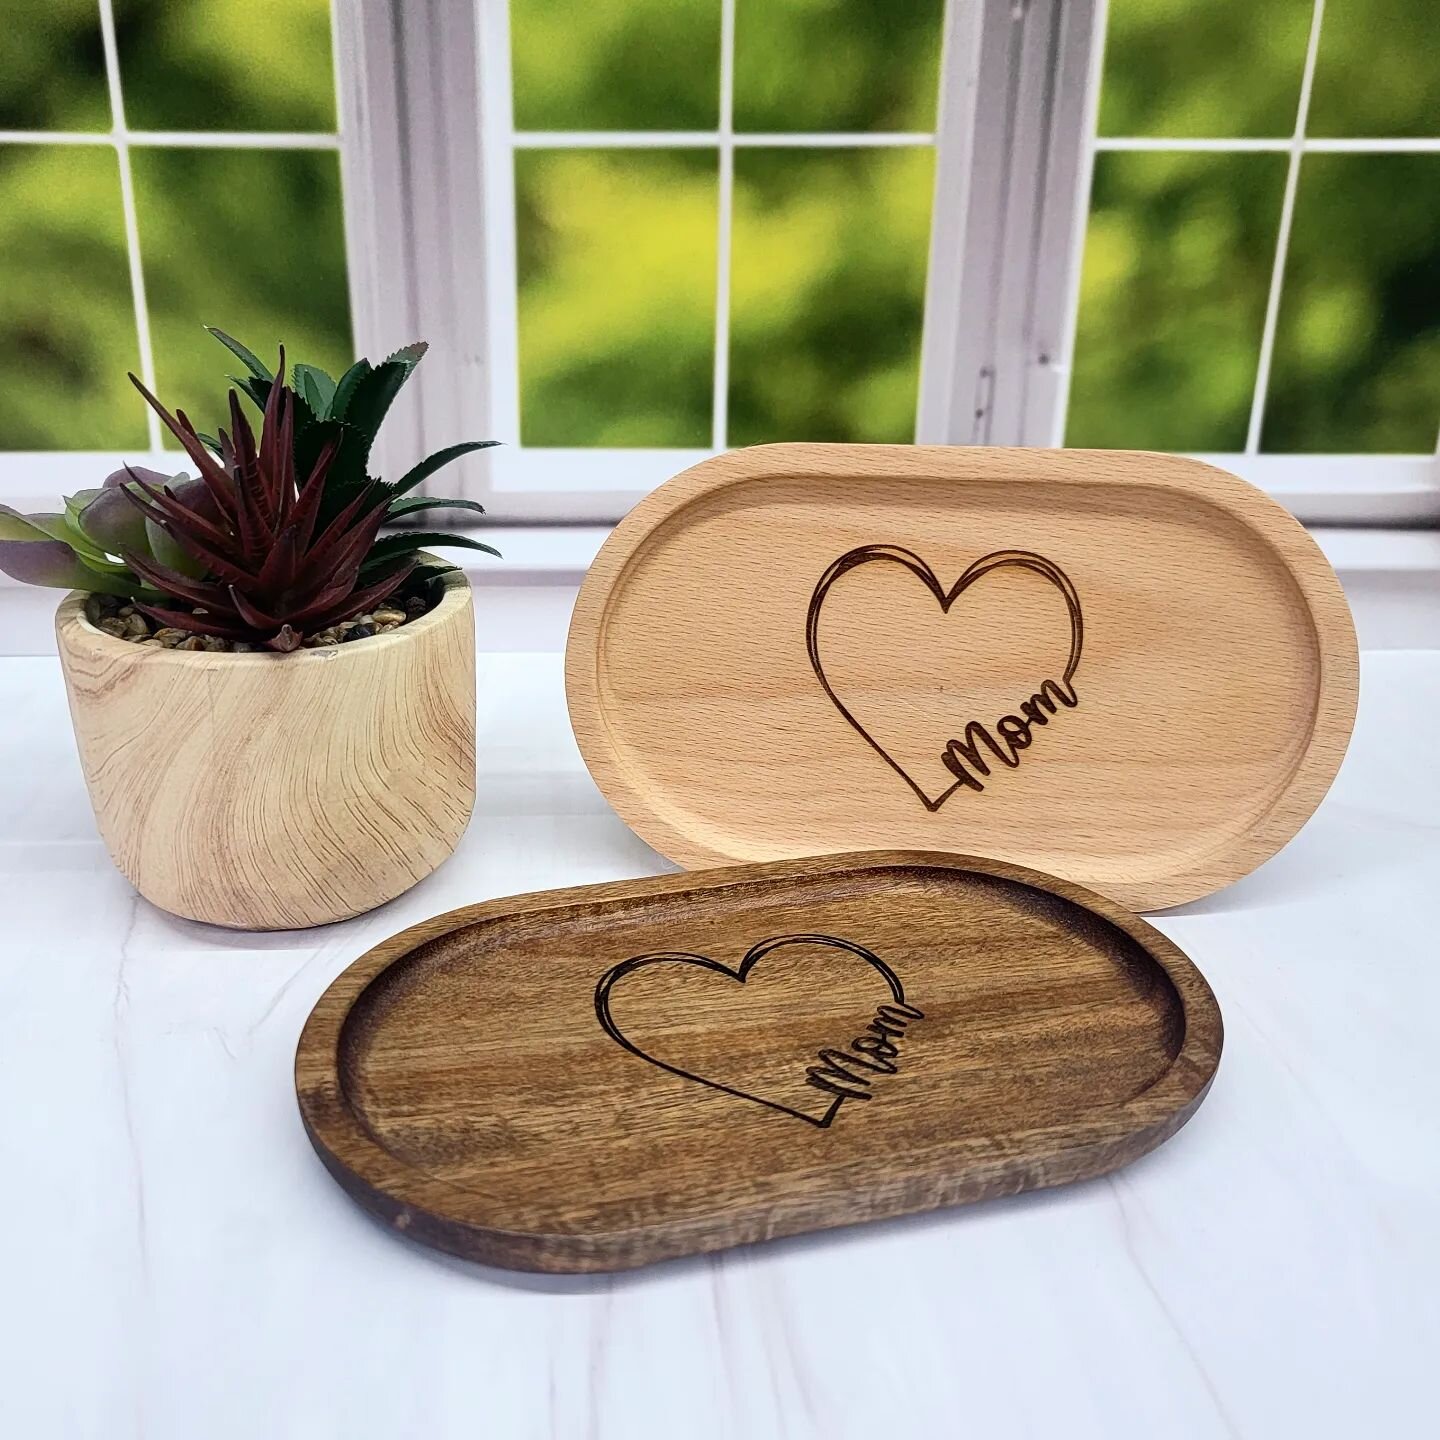 Mothers Day is around the corner. What do you get someone who has everything? A simple tray acknowledging them and how important they are to you ❤️
#mothersday #giftsformothersday #mom #momlife #giftsformom #smallbusinessowner #greeneny